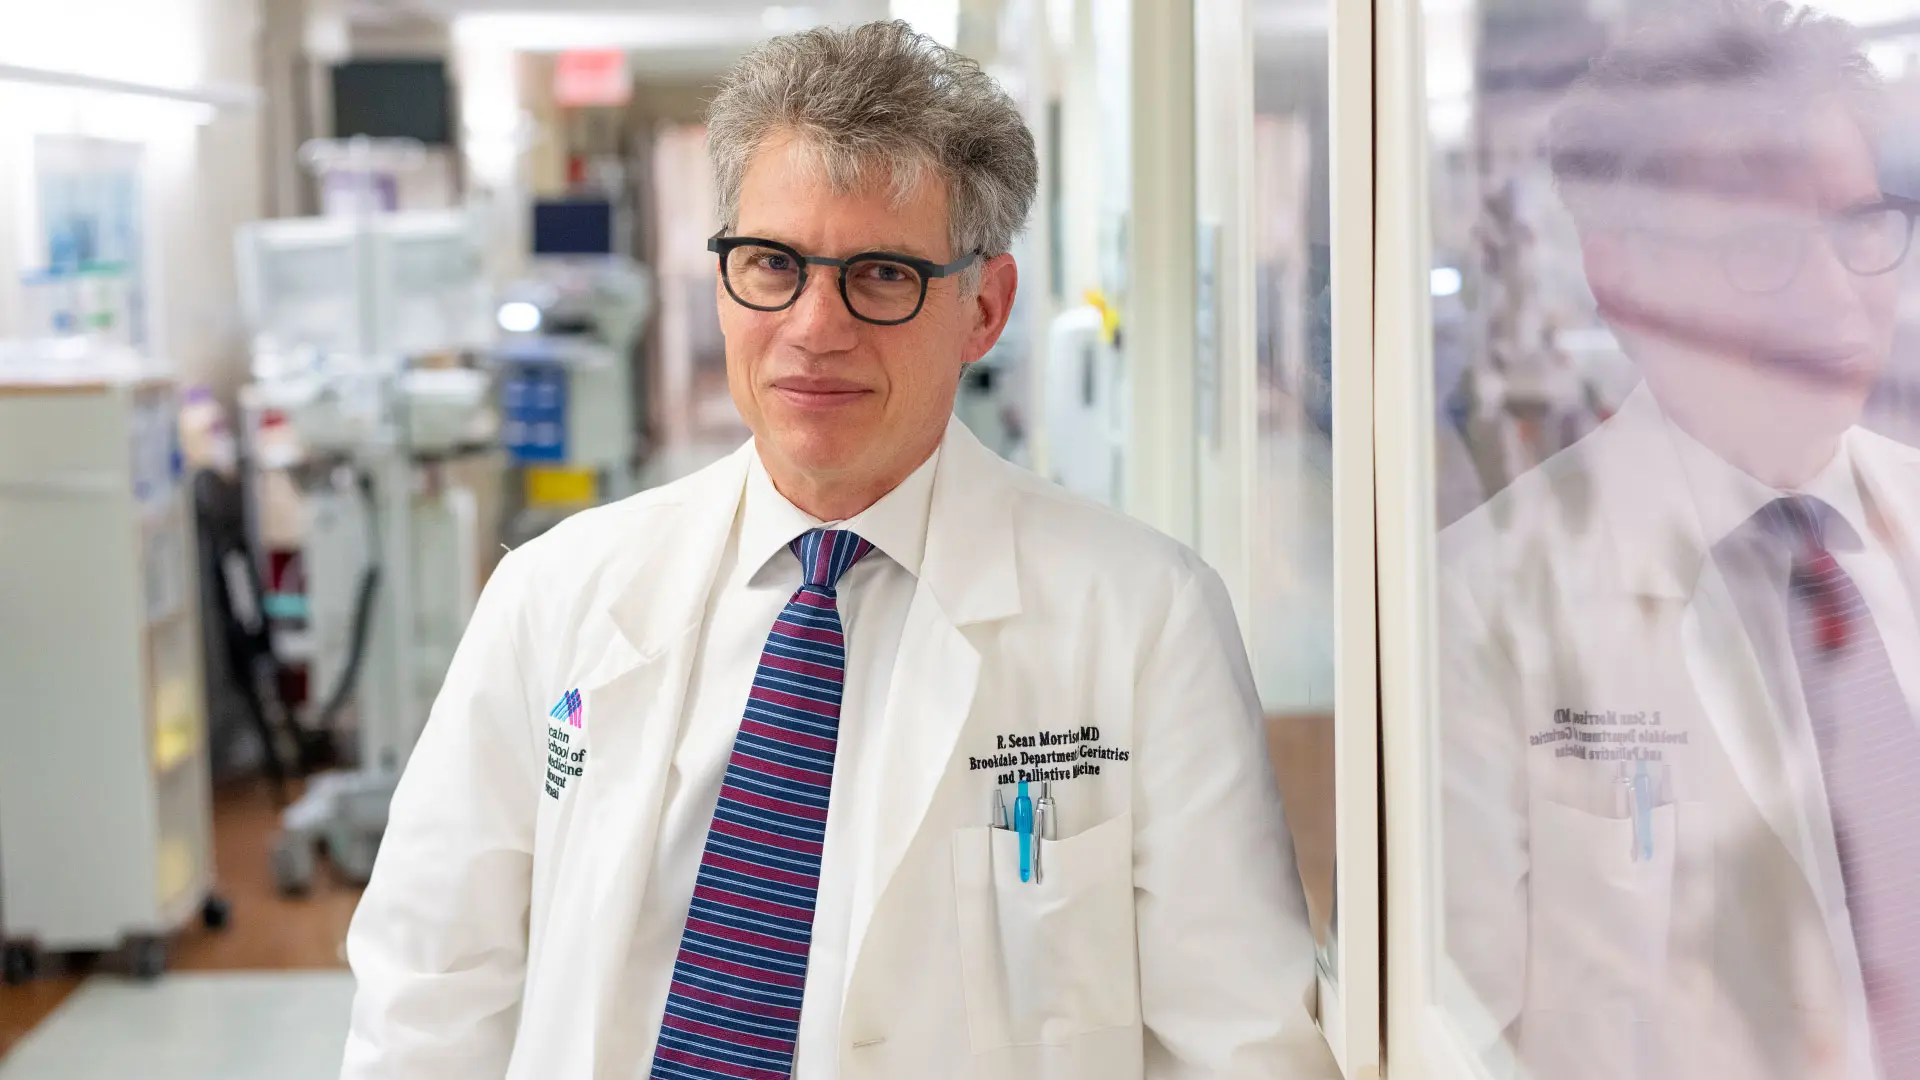 “The role of palliative care teams in critical care is to provide an added layer of support,” says R. Sean Morrison, MD, Ellen and Howard C. Katz Chair of the Brookdale Department. 